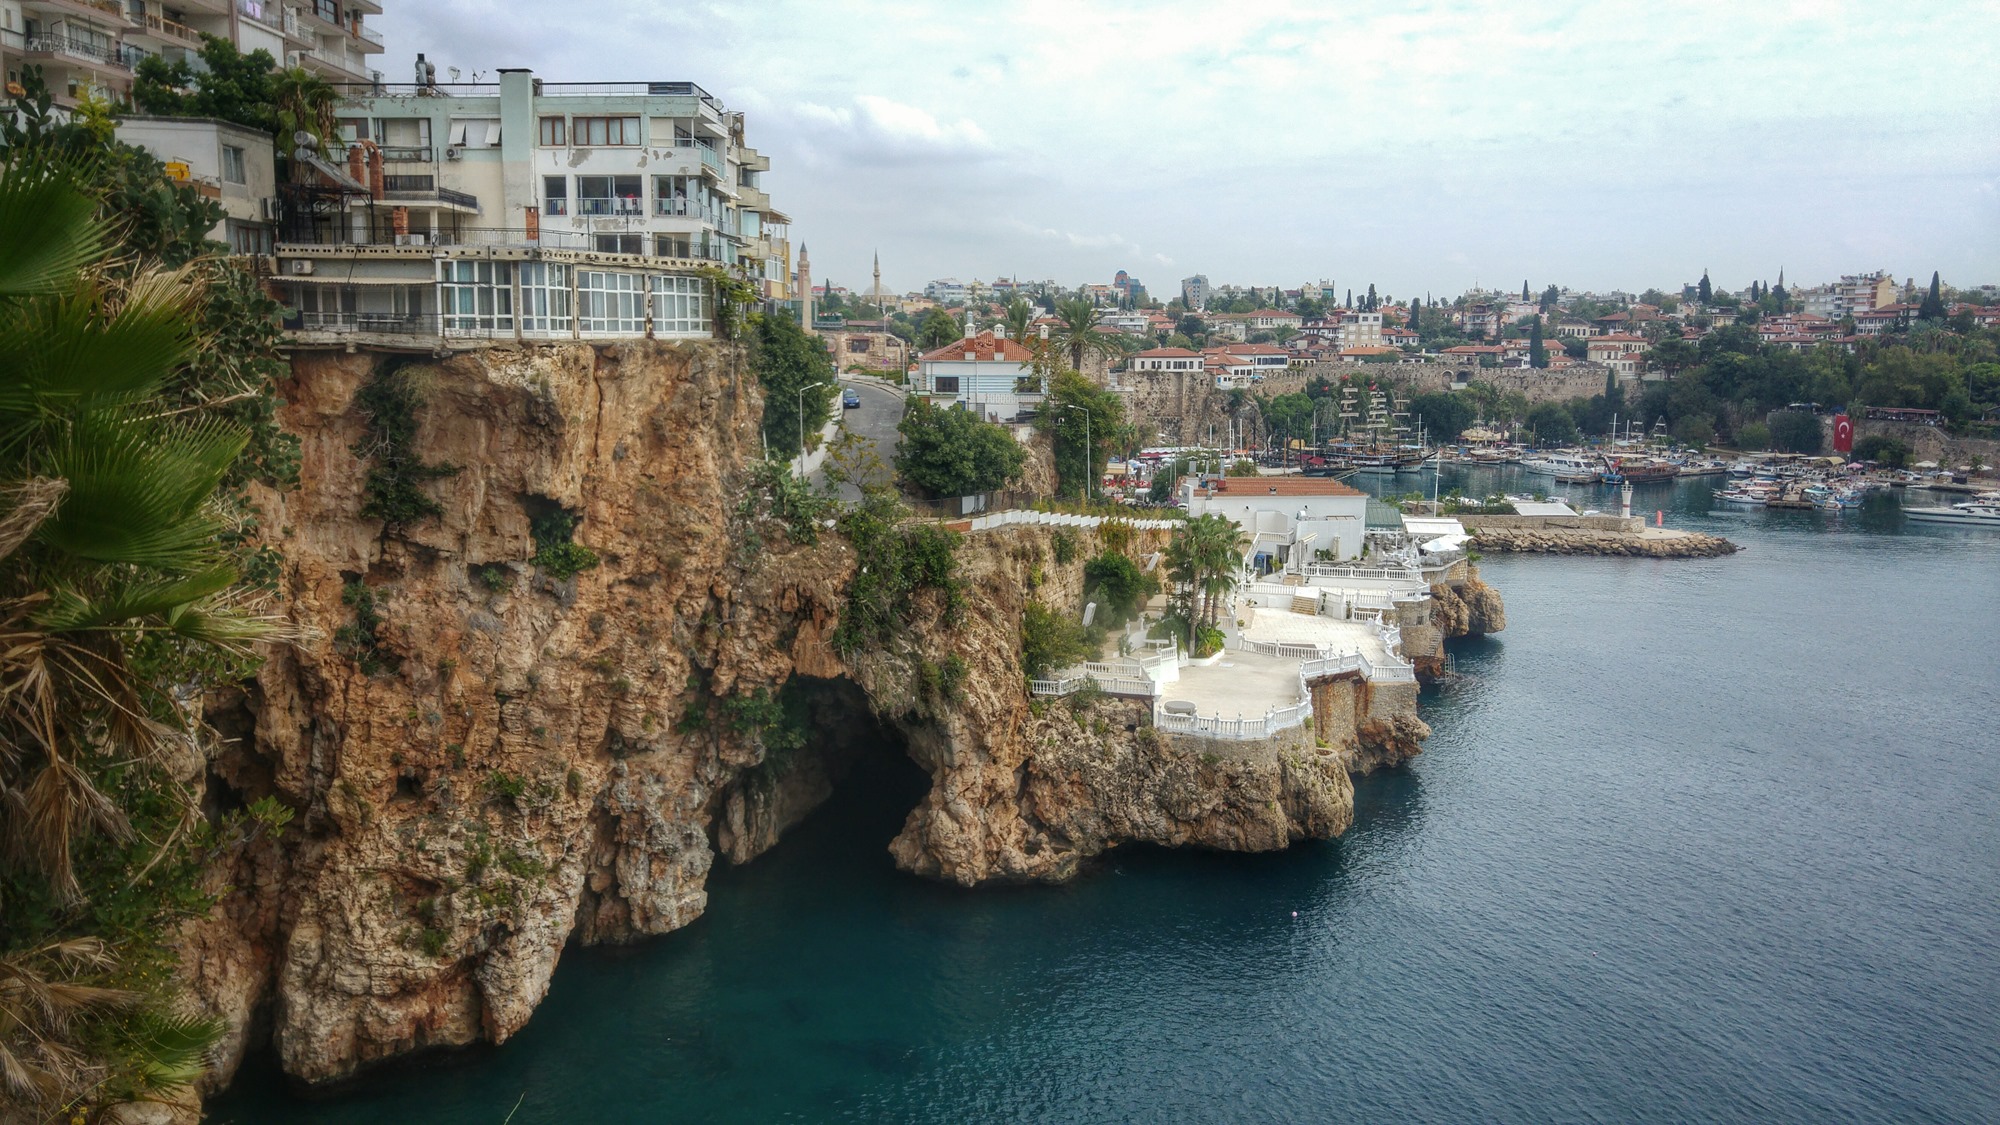 Visions of Kaleici Old City : Antalya – Turkey | Visions of Travel